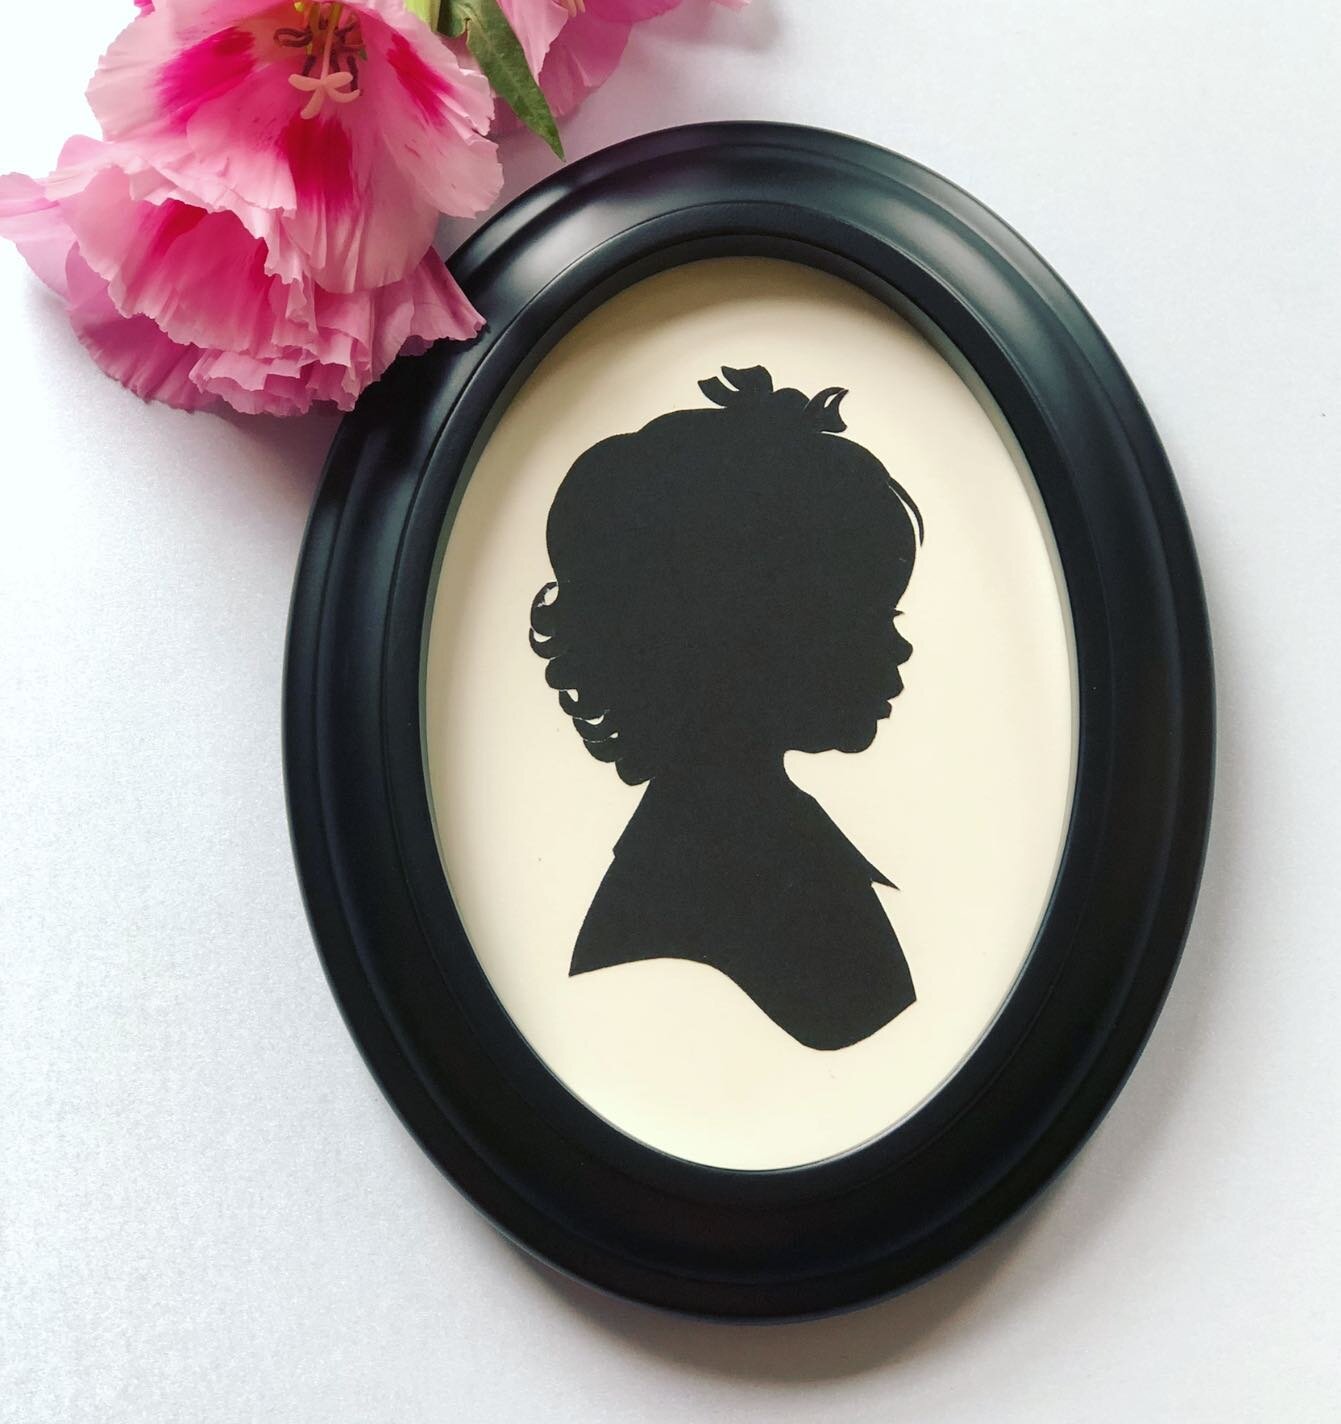 I&rsquo;m cutting silhouettes @pinkchickenny in Santa Monica on Friday, May 5! Give Mom a unique gift this Mother&rsquo;s Day 💕 Sign up at https://tinyurl.com/Pink-Chicken23 or at the link in my bio. 

#cutarts #karljohnson #silhouetteartist #santam